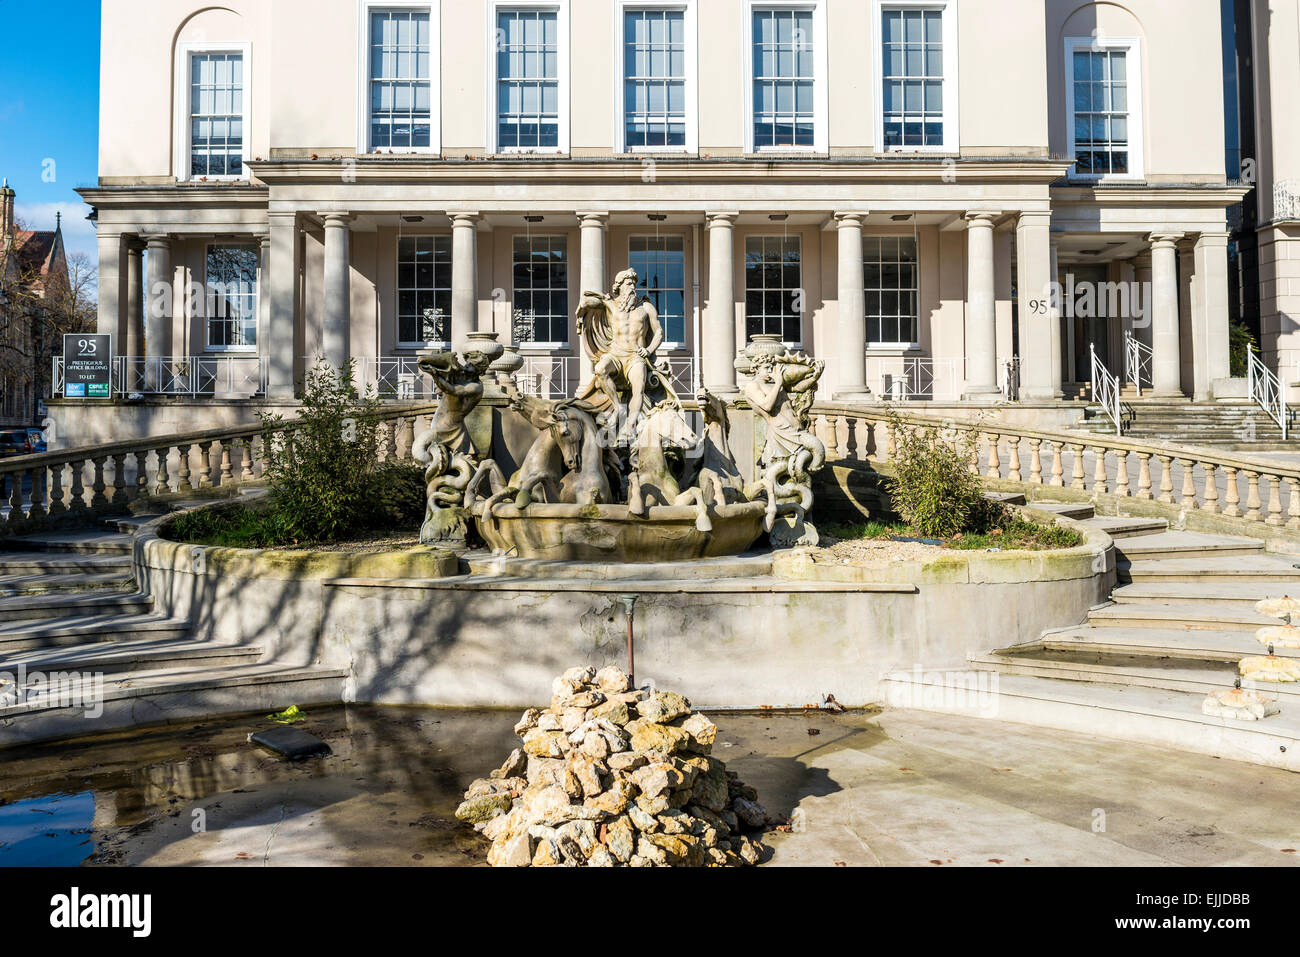 The Neptune Fountain in Cheltenham is a local landmark modeled on the Trevi Fountain in Rome showing sea god Neptune and horses Stock Photo